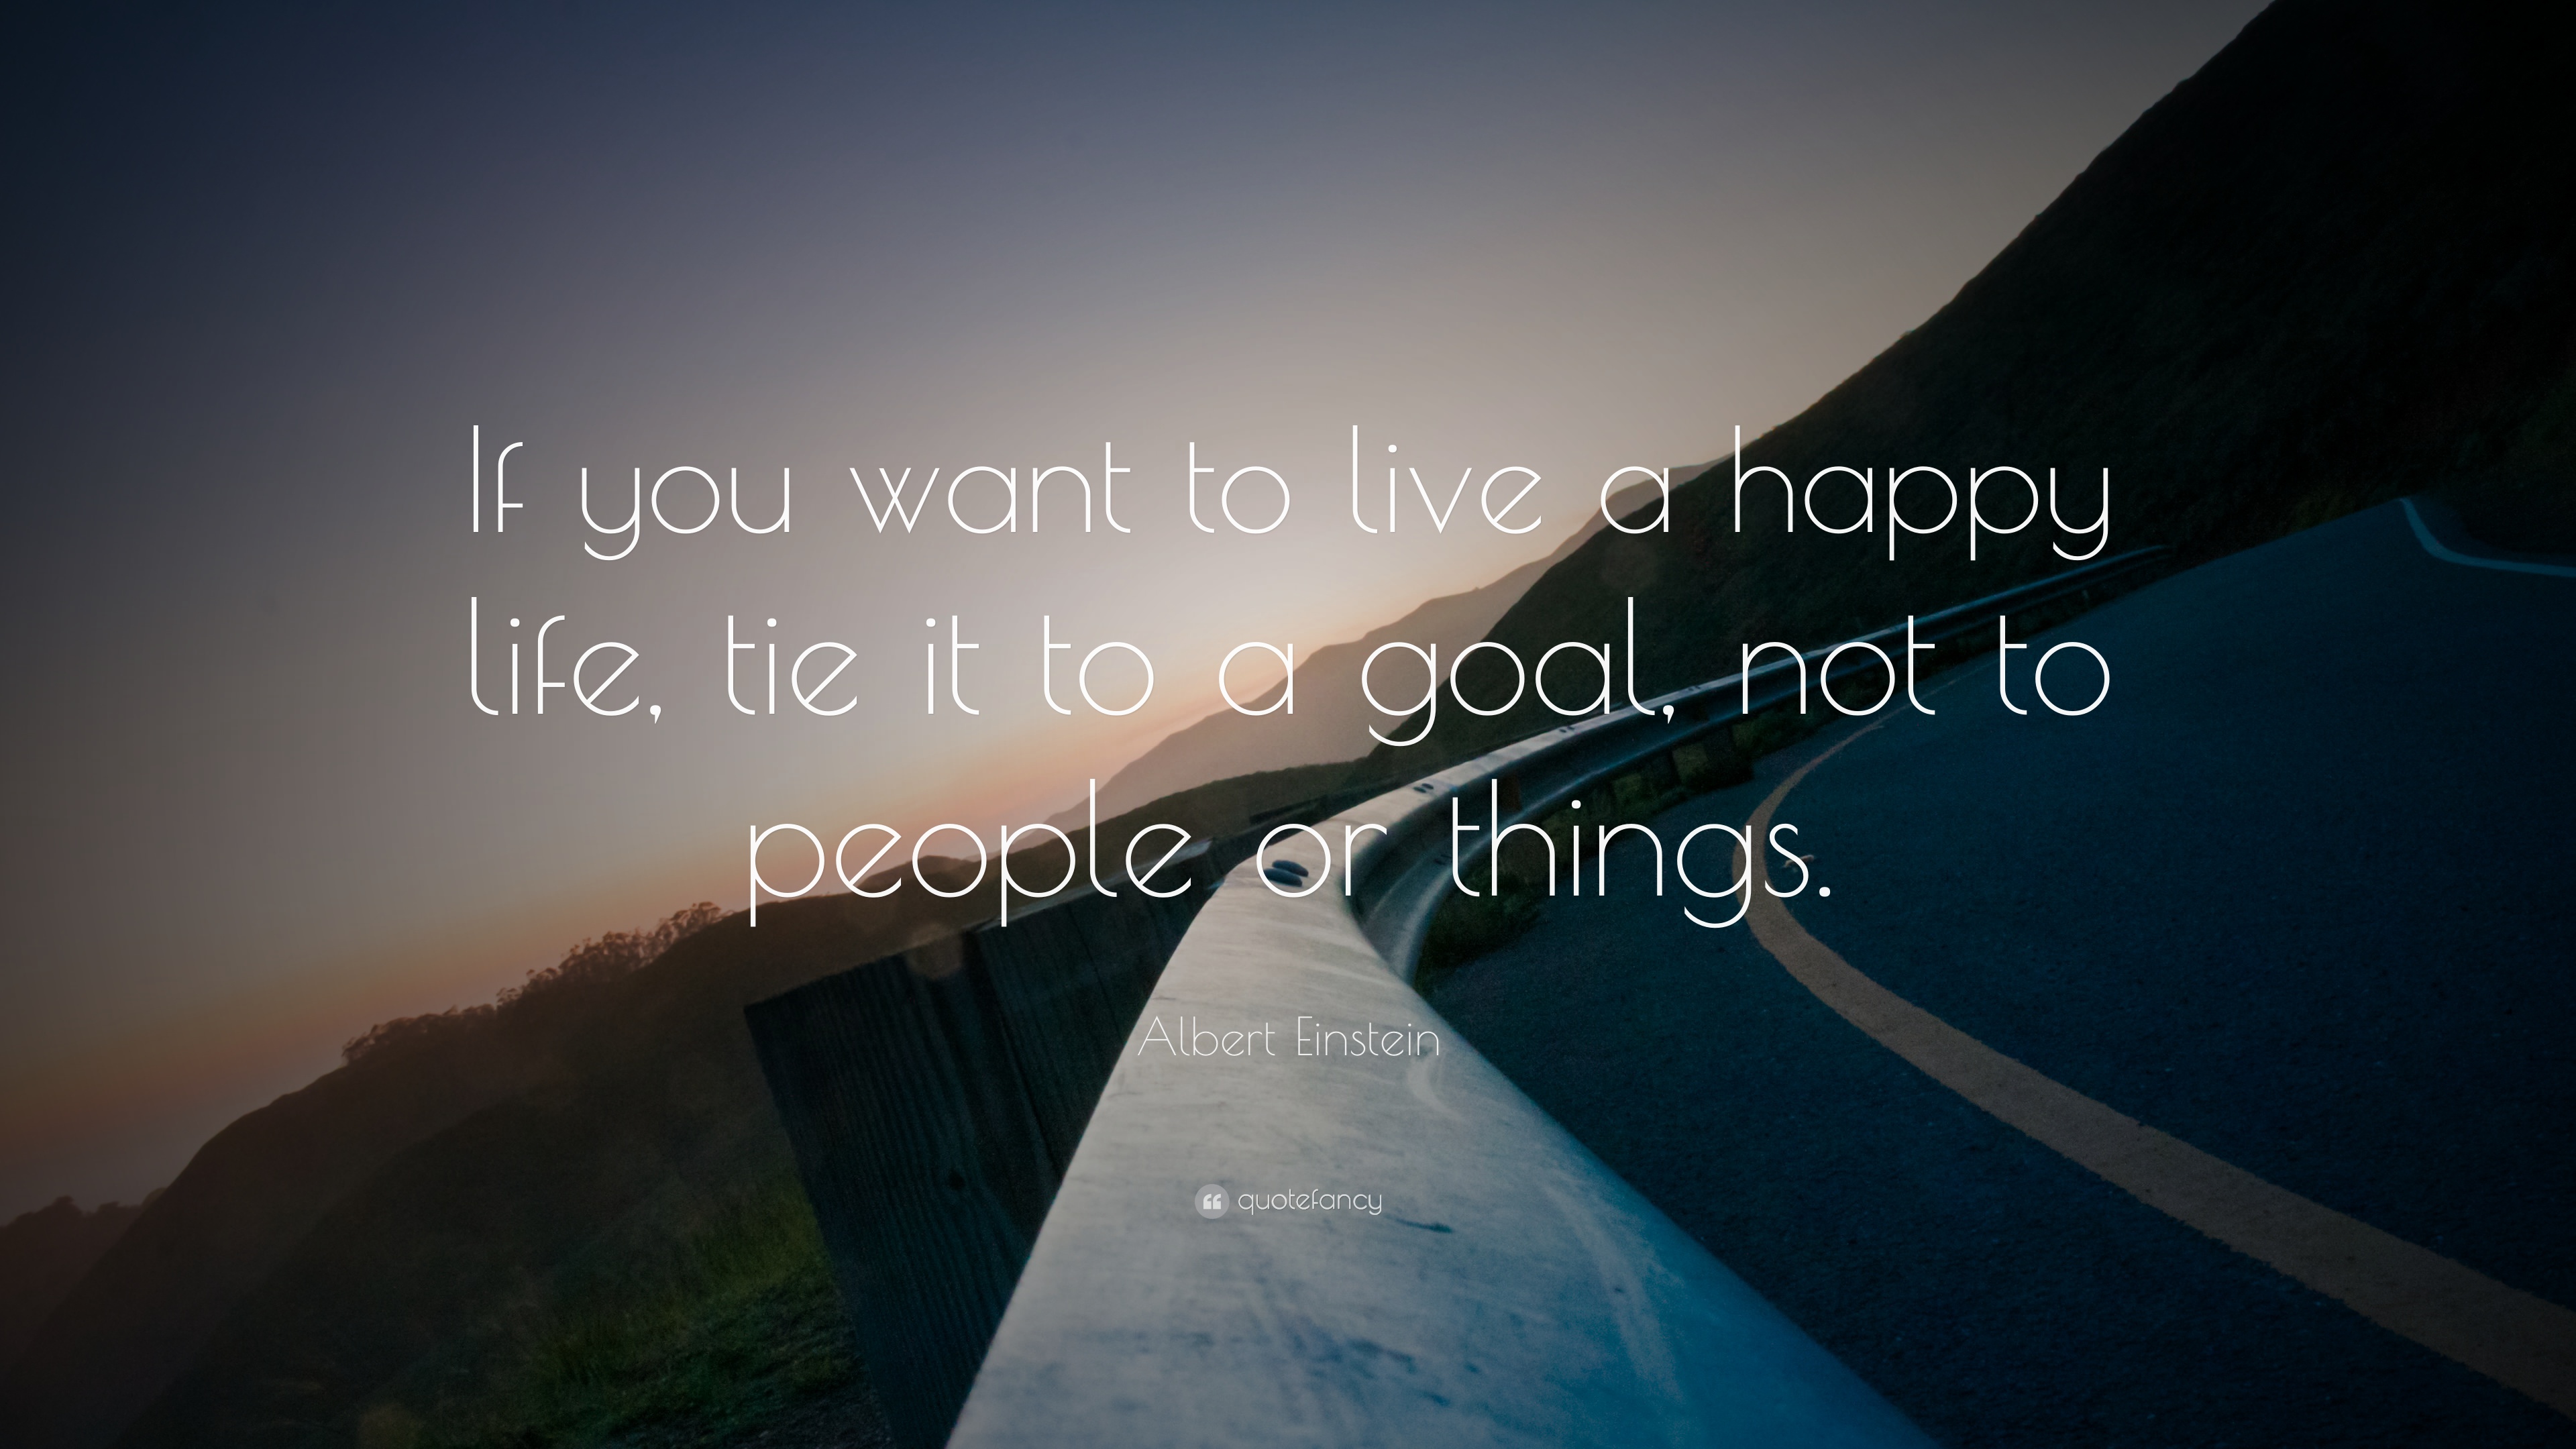 Albert Einstein Quote: “If you want to live a happy life, tie it